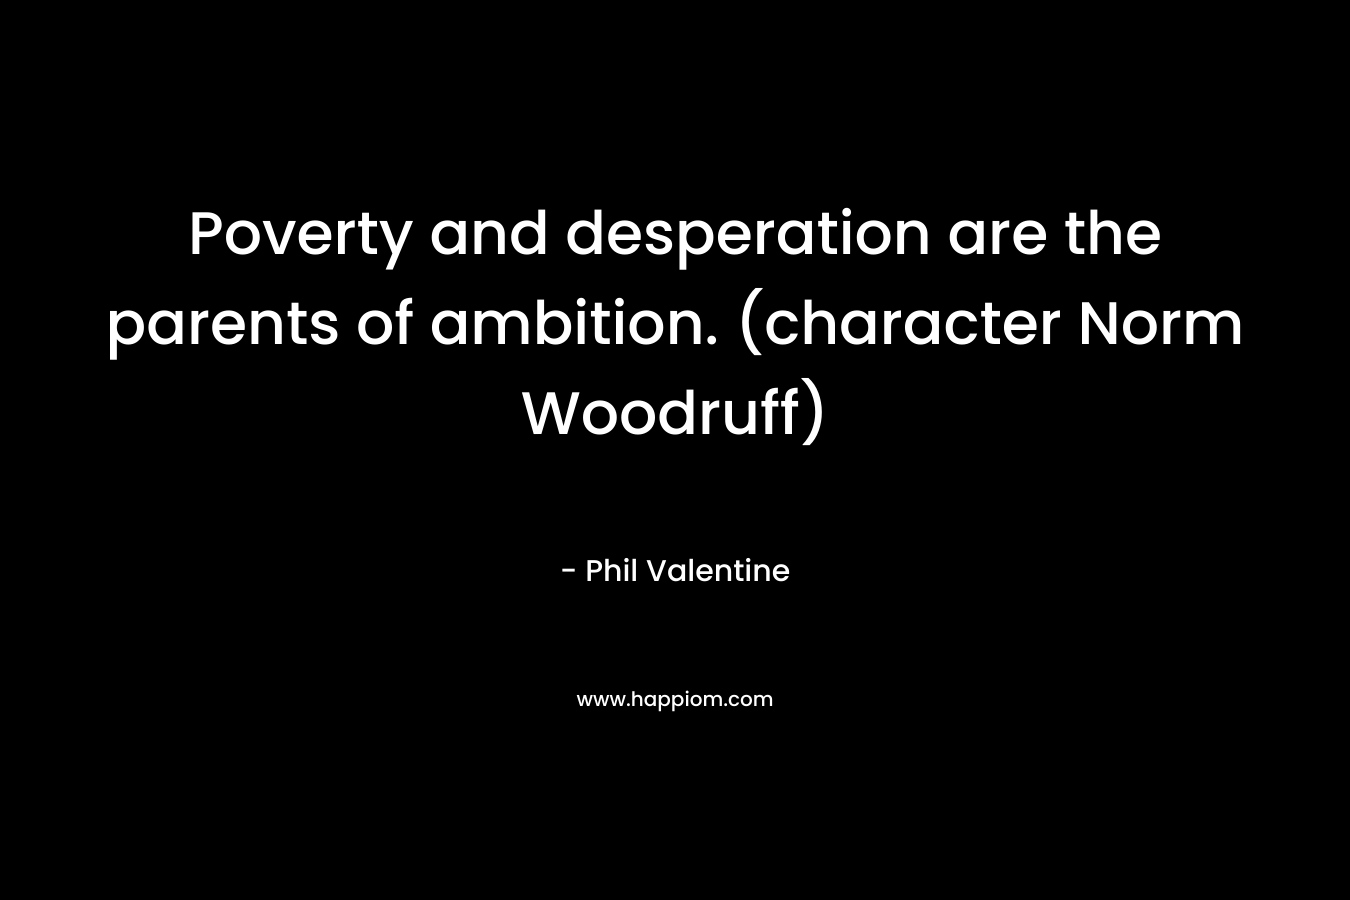 Poverty and desperation are the parents of ambition. (character Norm Woodruff)